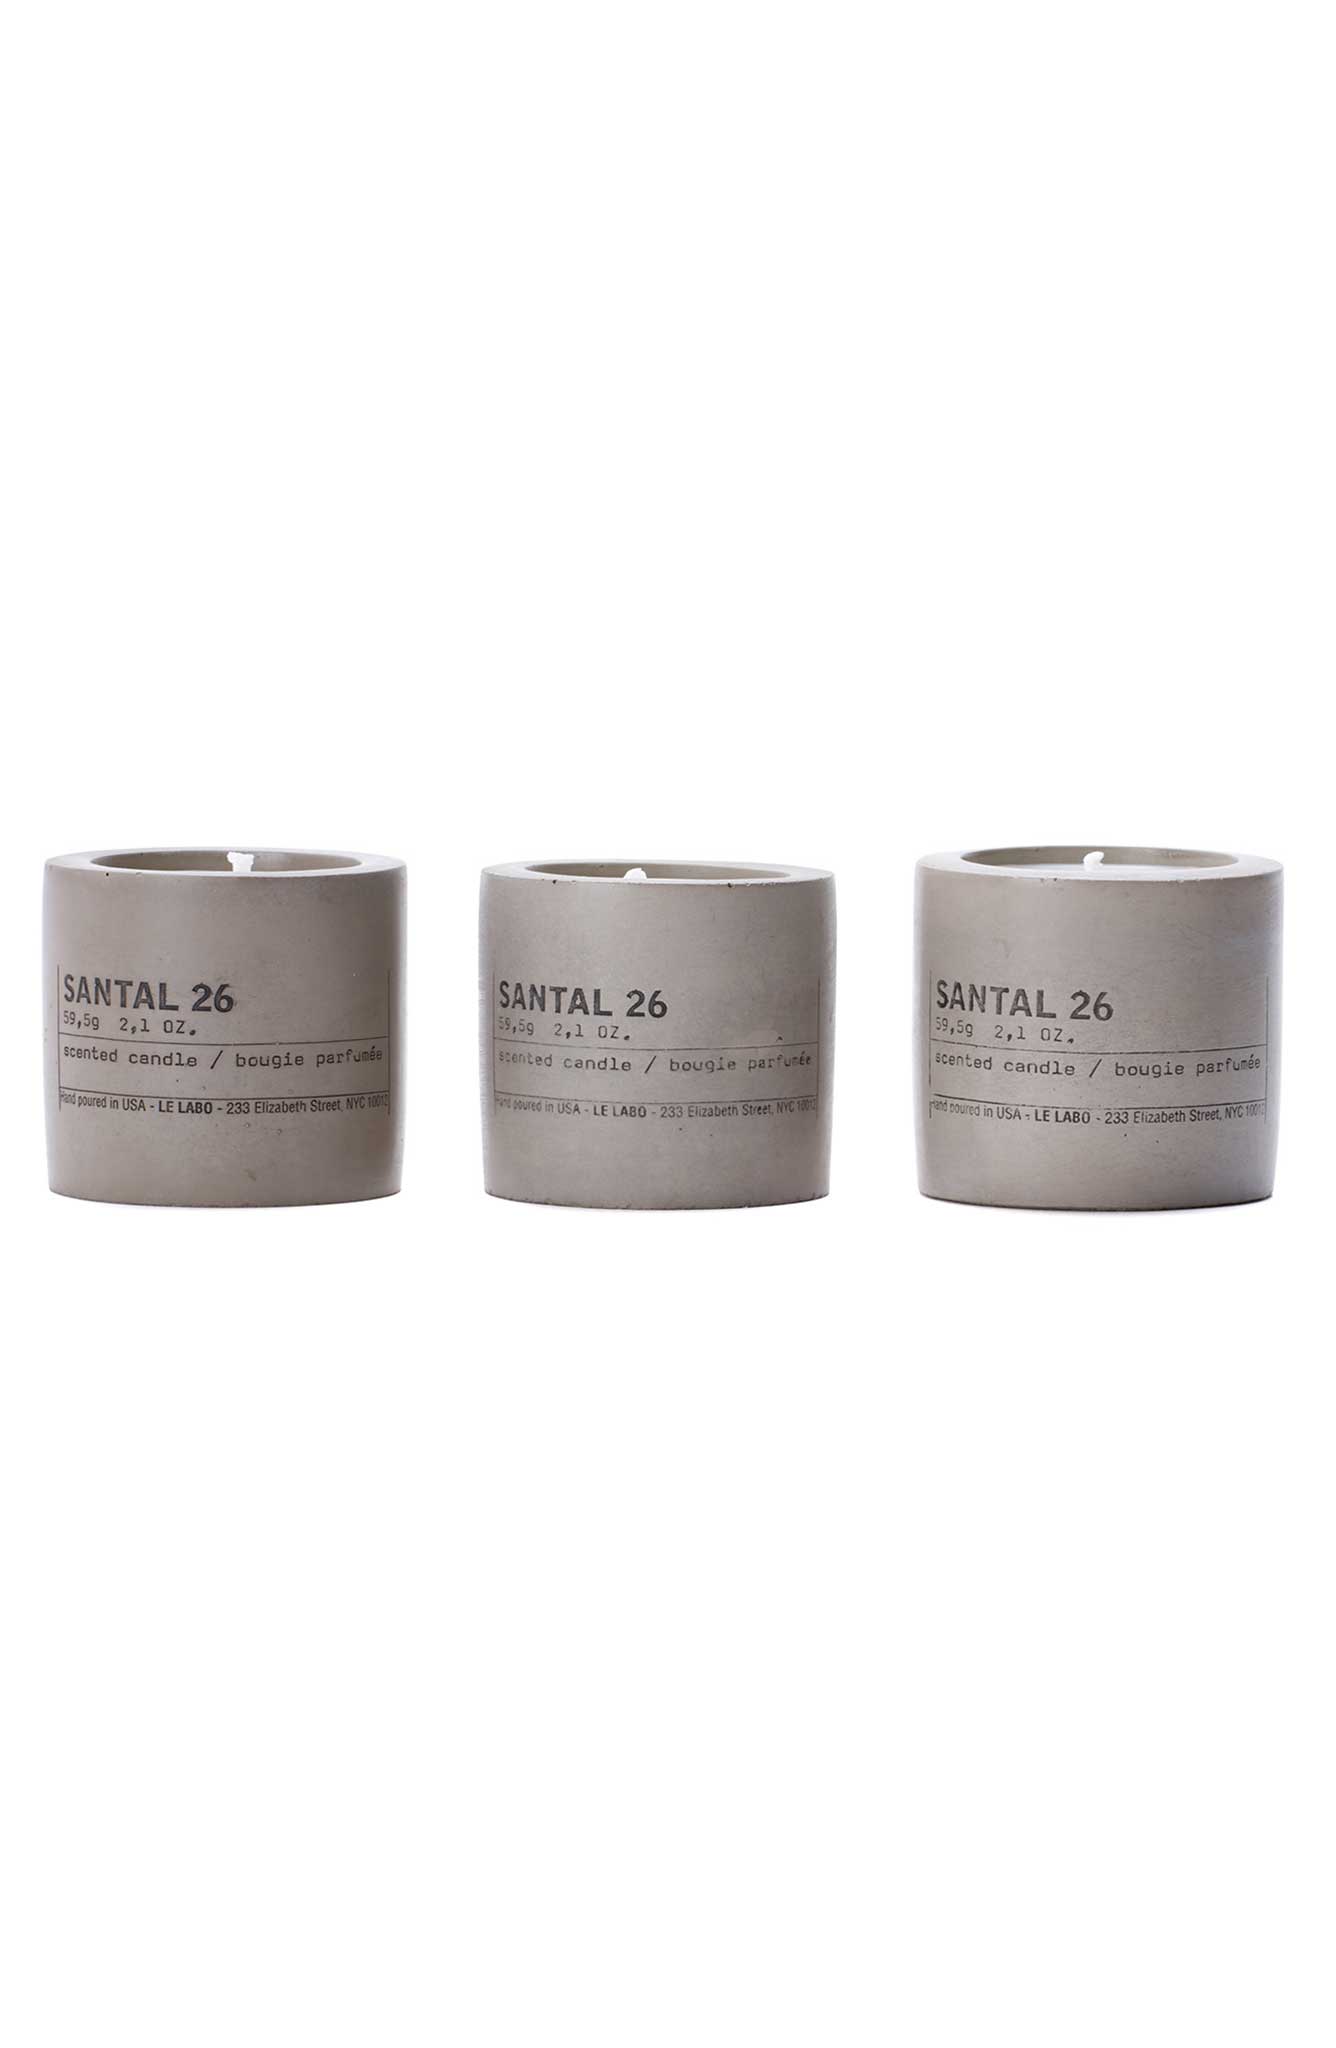 Le Labo Santal Concrete Candle Set: I love the way “Santal 33” fragrance smells subtle and warm on the skin. I was also excited to see the home version of the scent “Santal 26” available in a trio for the Sale. The vessels are so modern, minimal and chic.